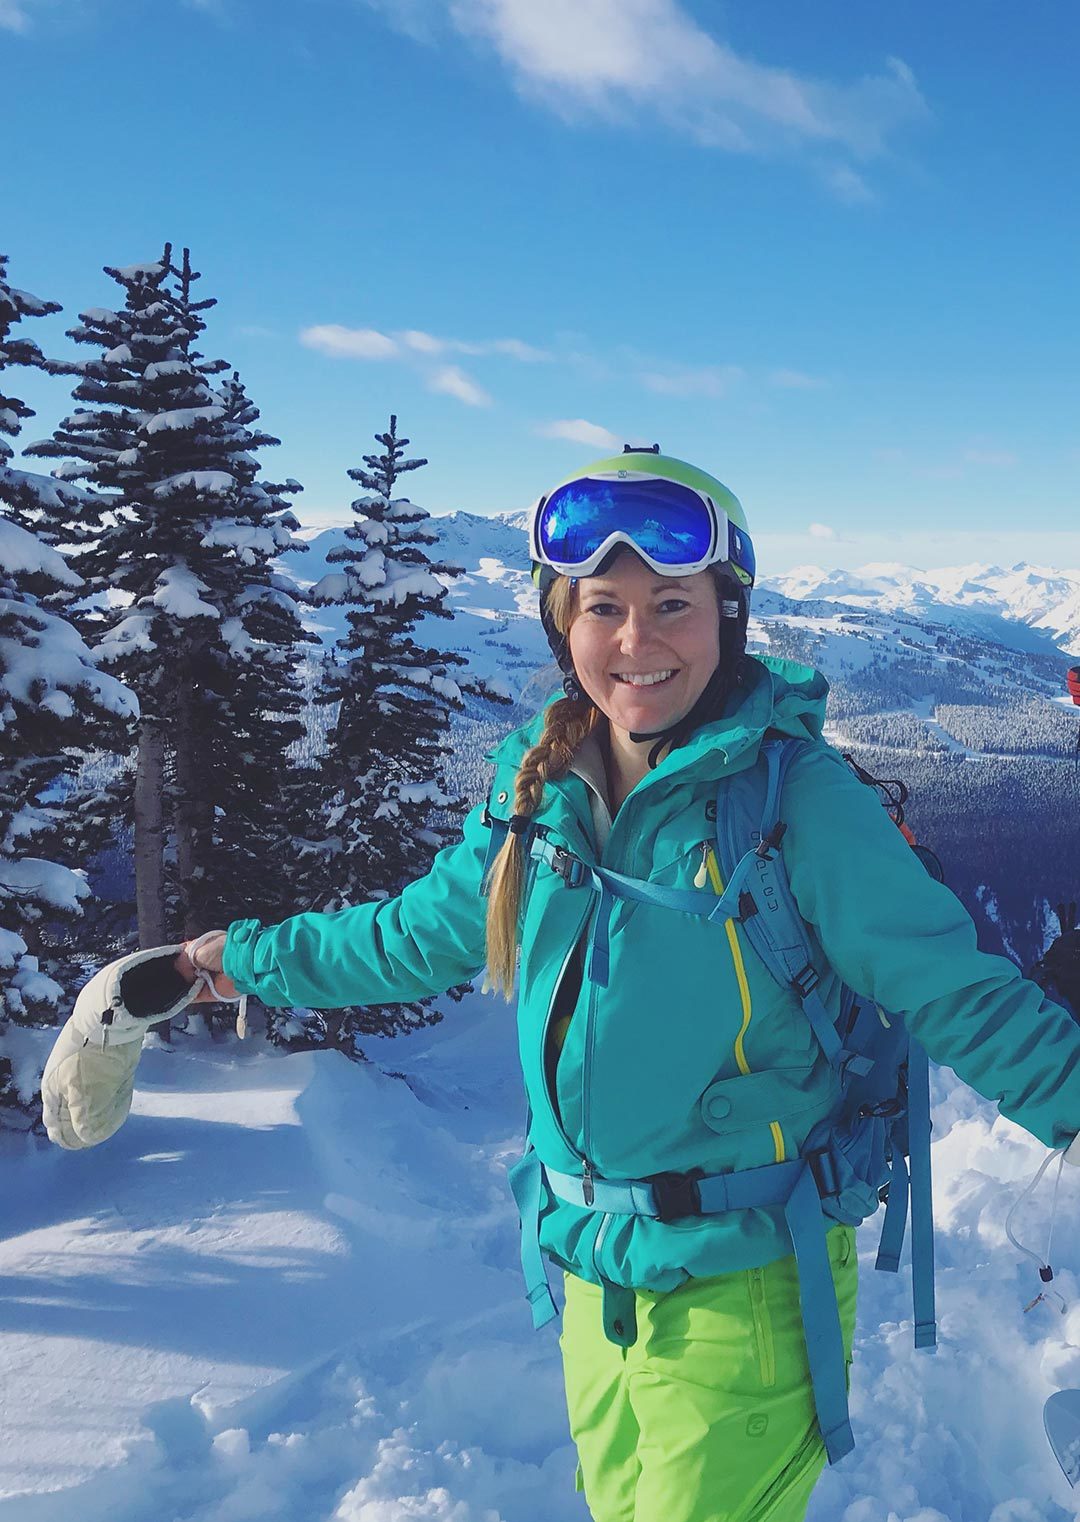 how-to-start-backcountry-skiing-touring-gear-you-need-north-shore-shi-board-squamish-rachelle-hynes